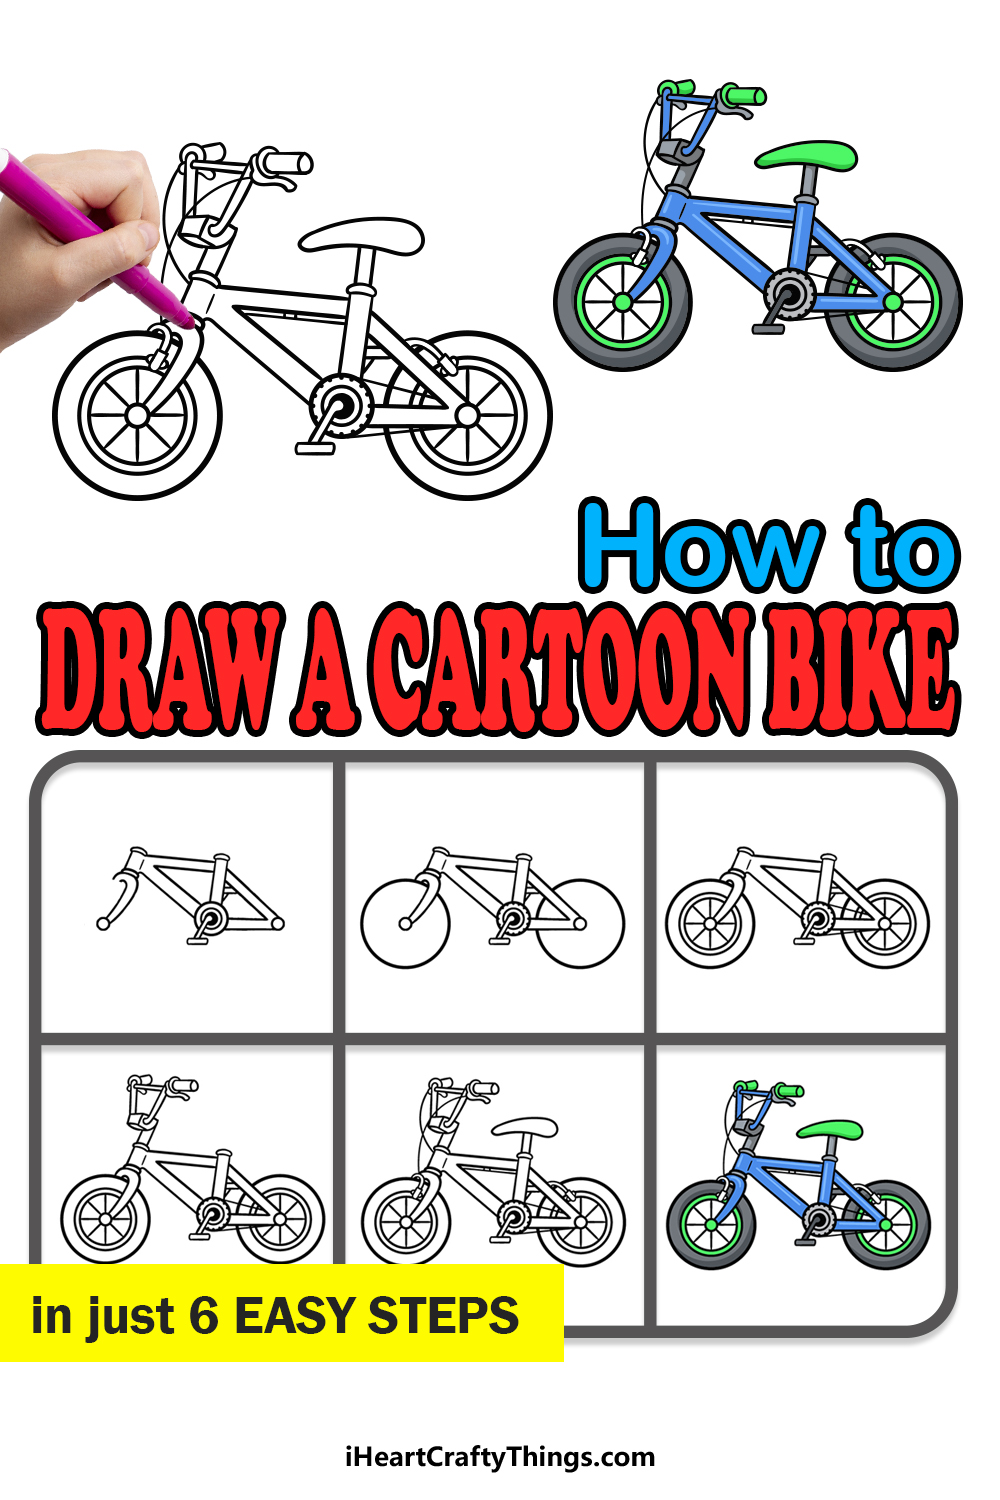 how to draw a cartoon bike in 6 easy steps